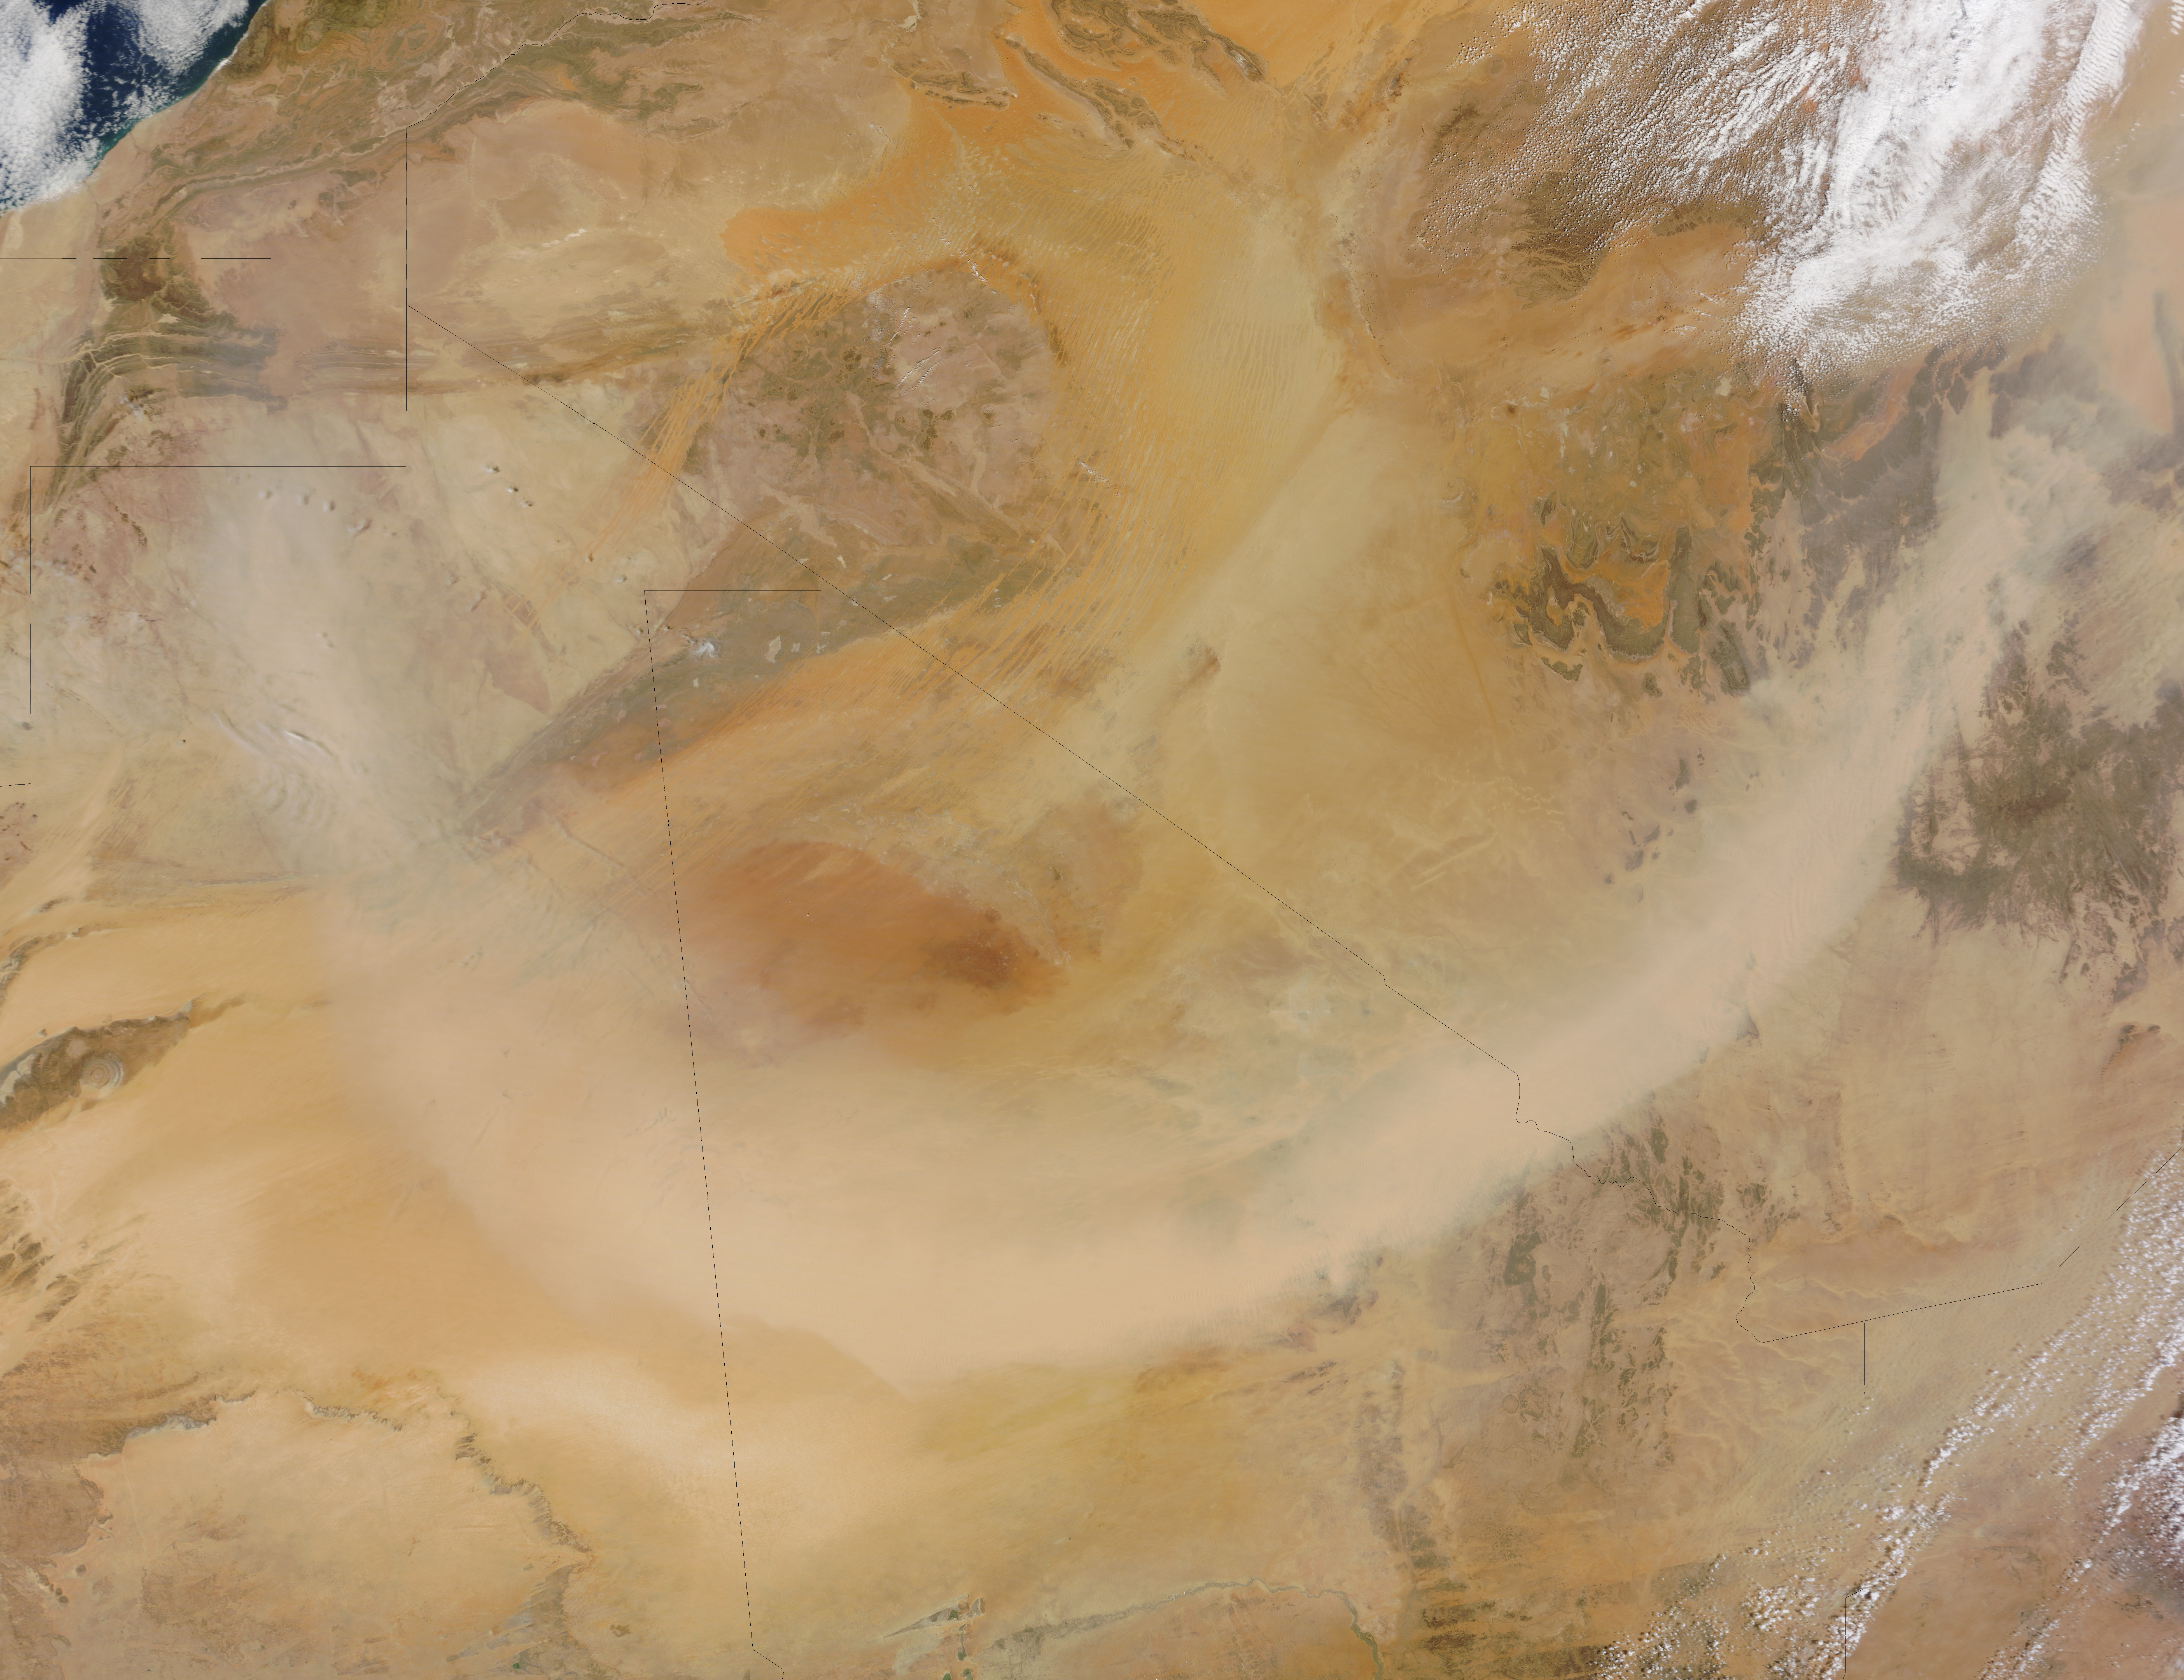 Dust Plume over the Sahara - related image preview